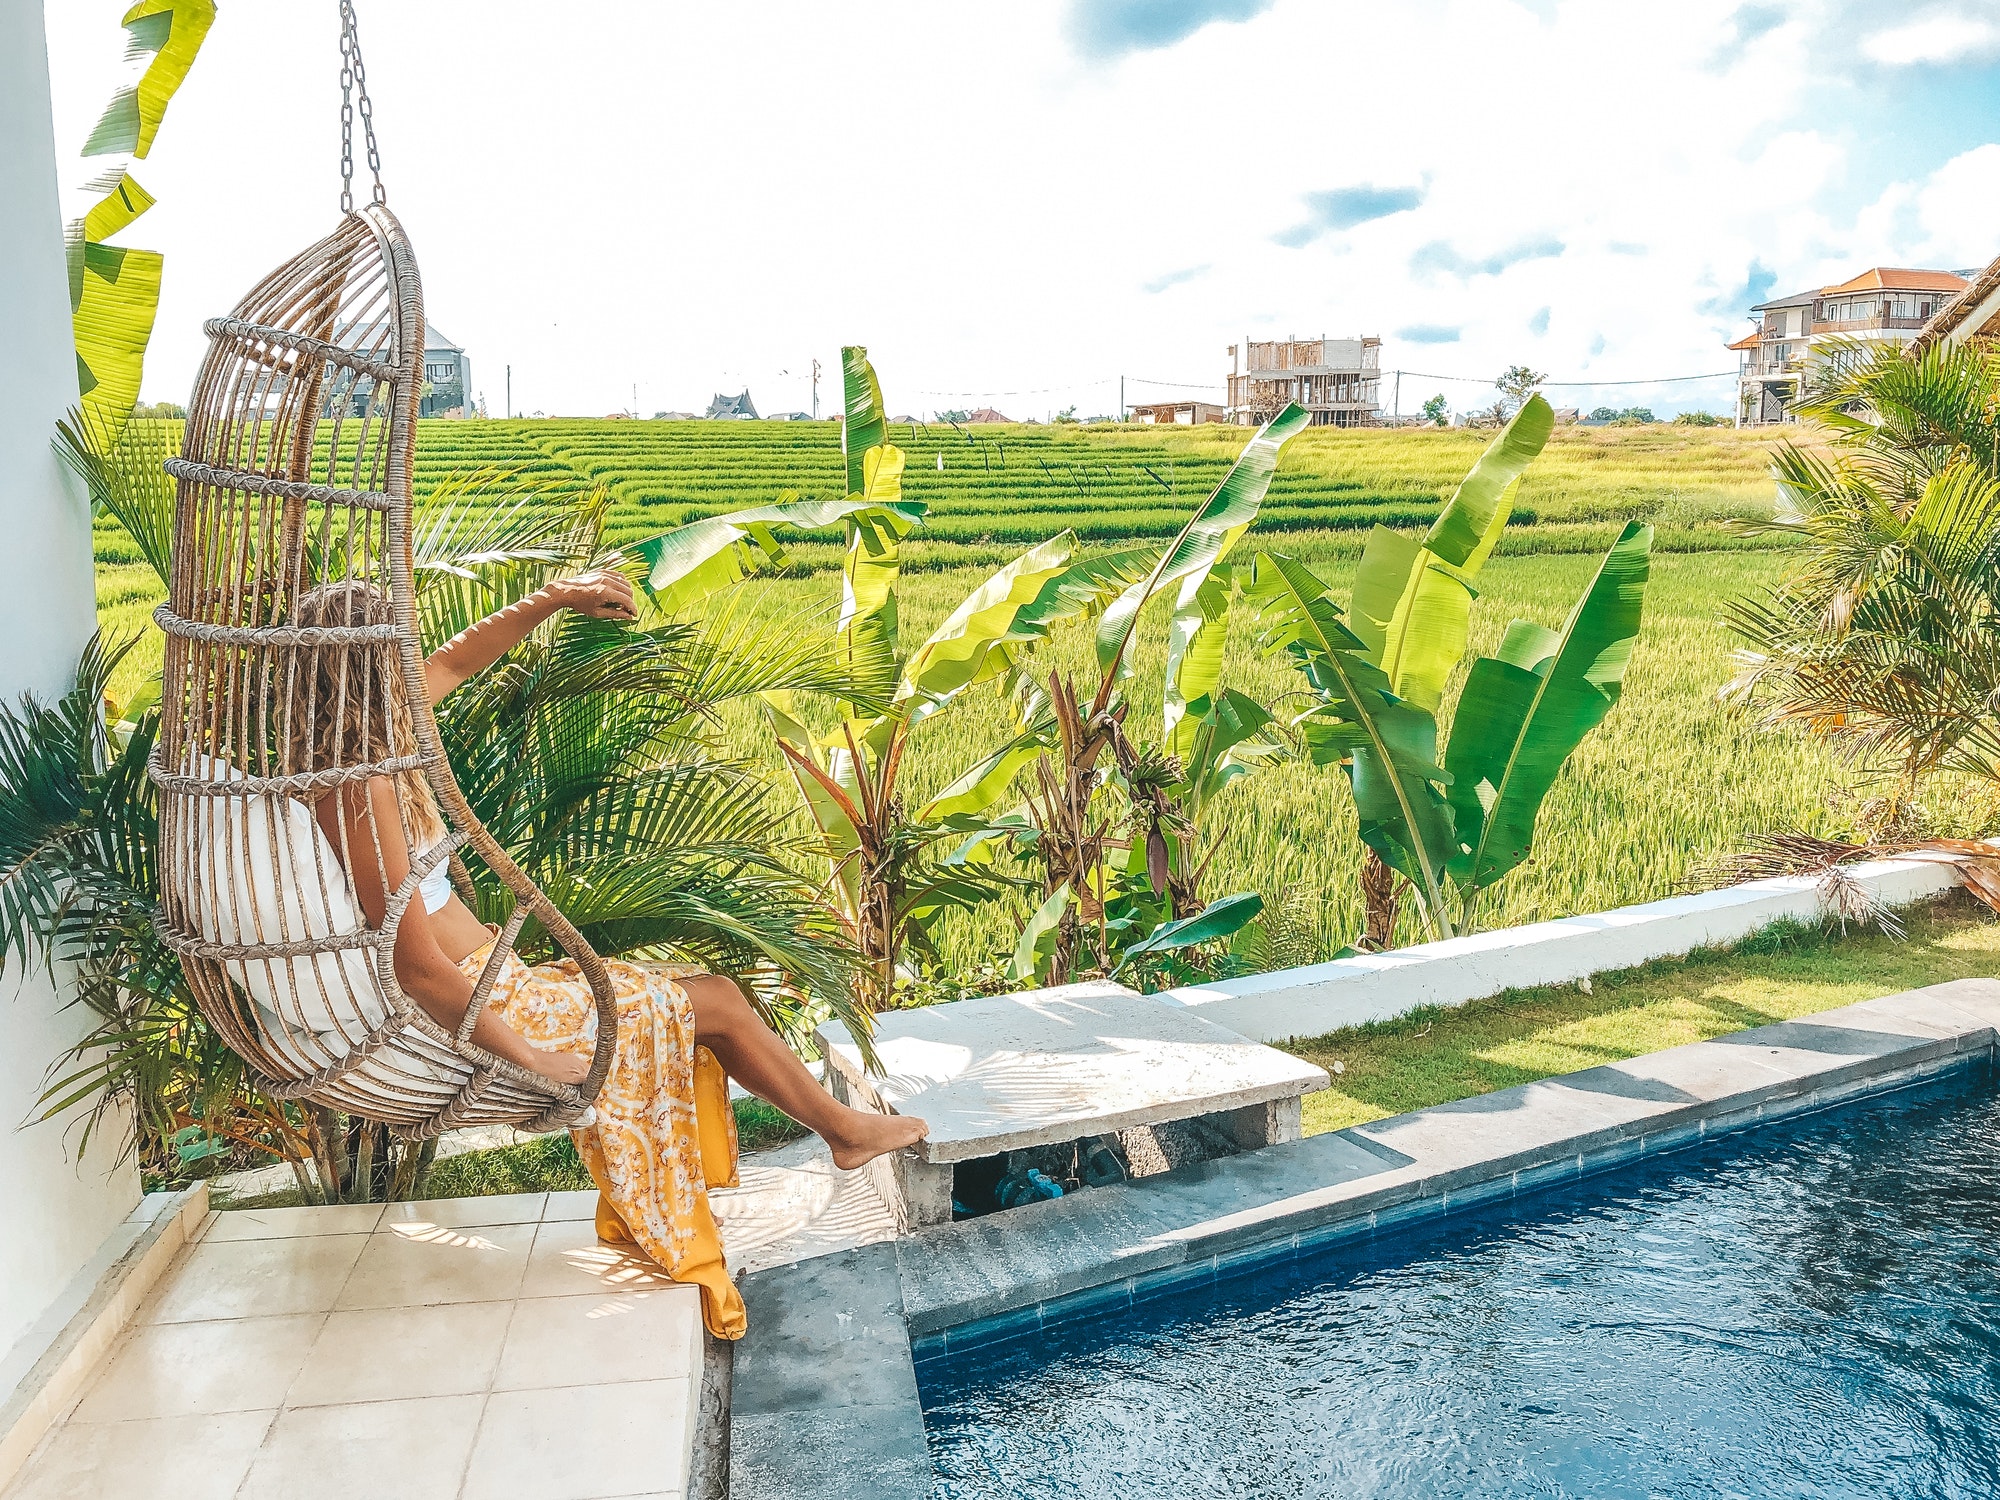 Woman relaxing in the swinging chair by the rice fields